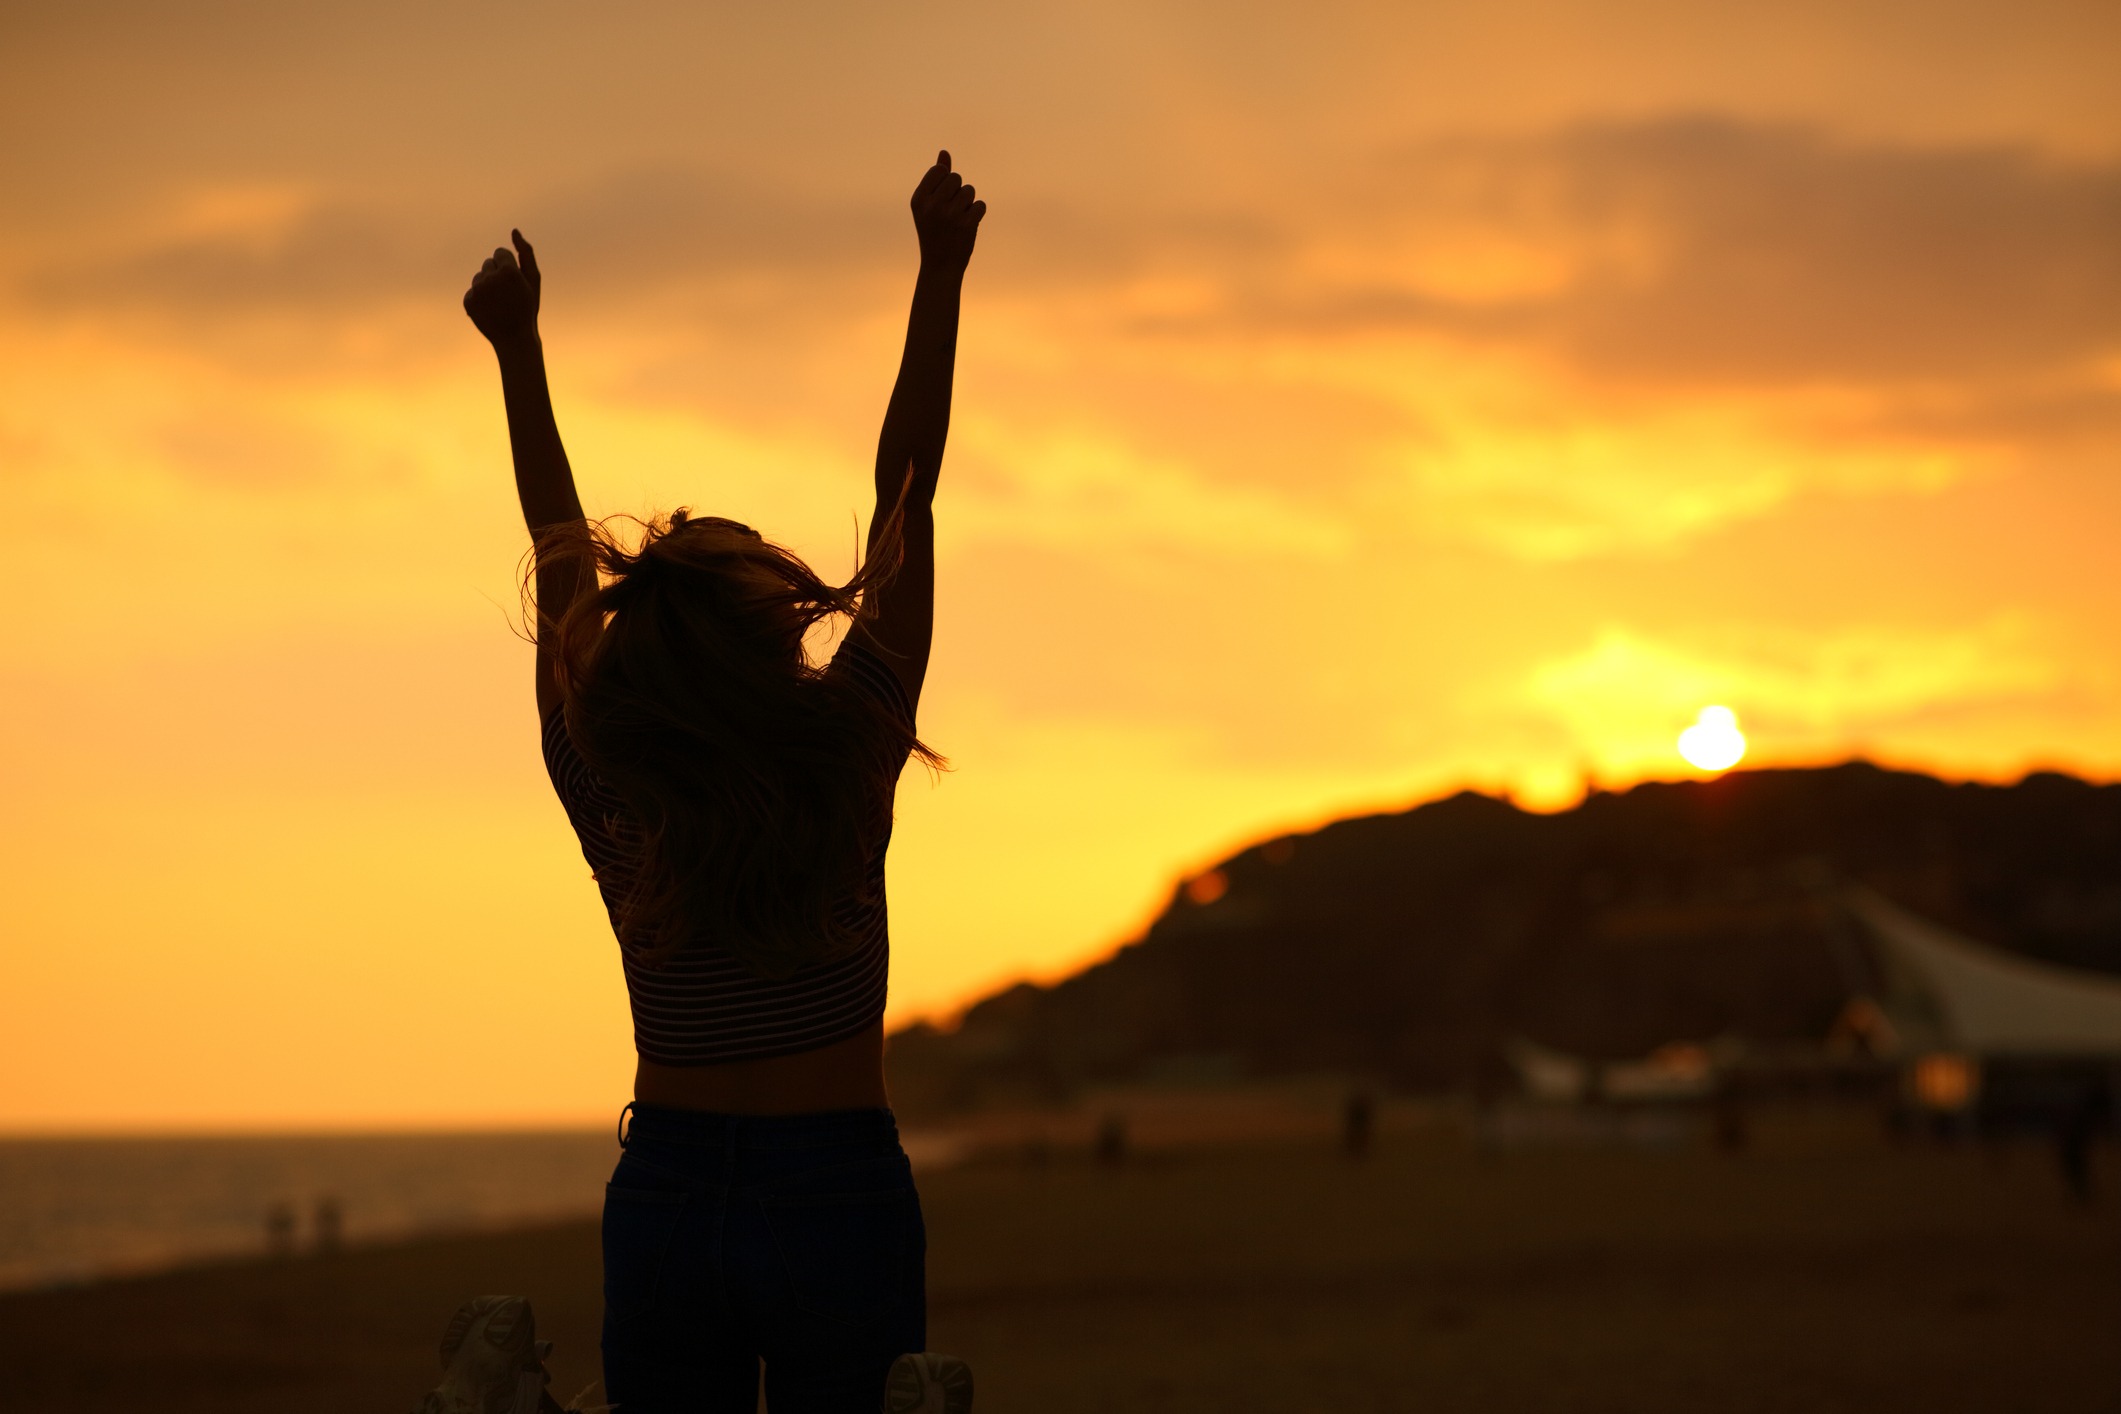 A silhouette of a person raising their fists at sunset